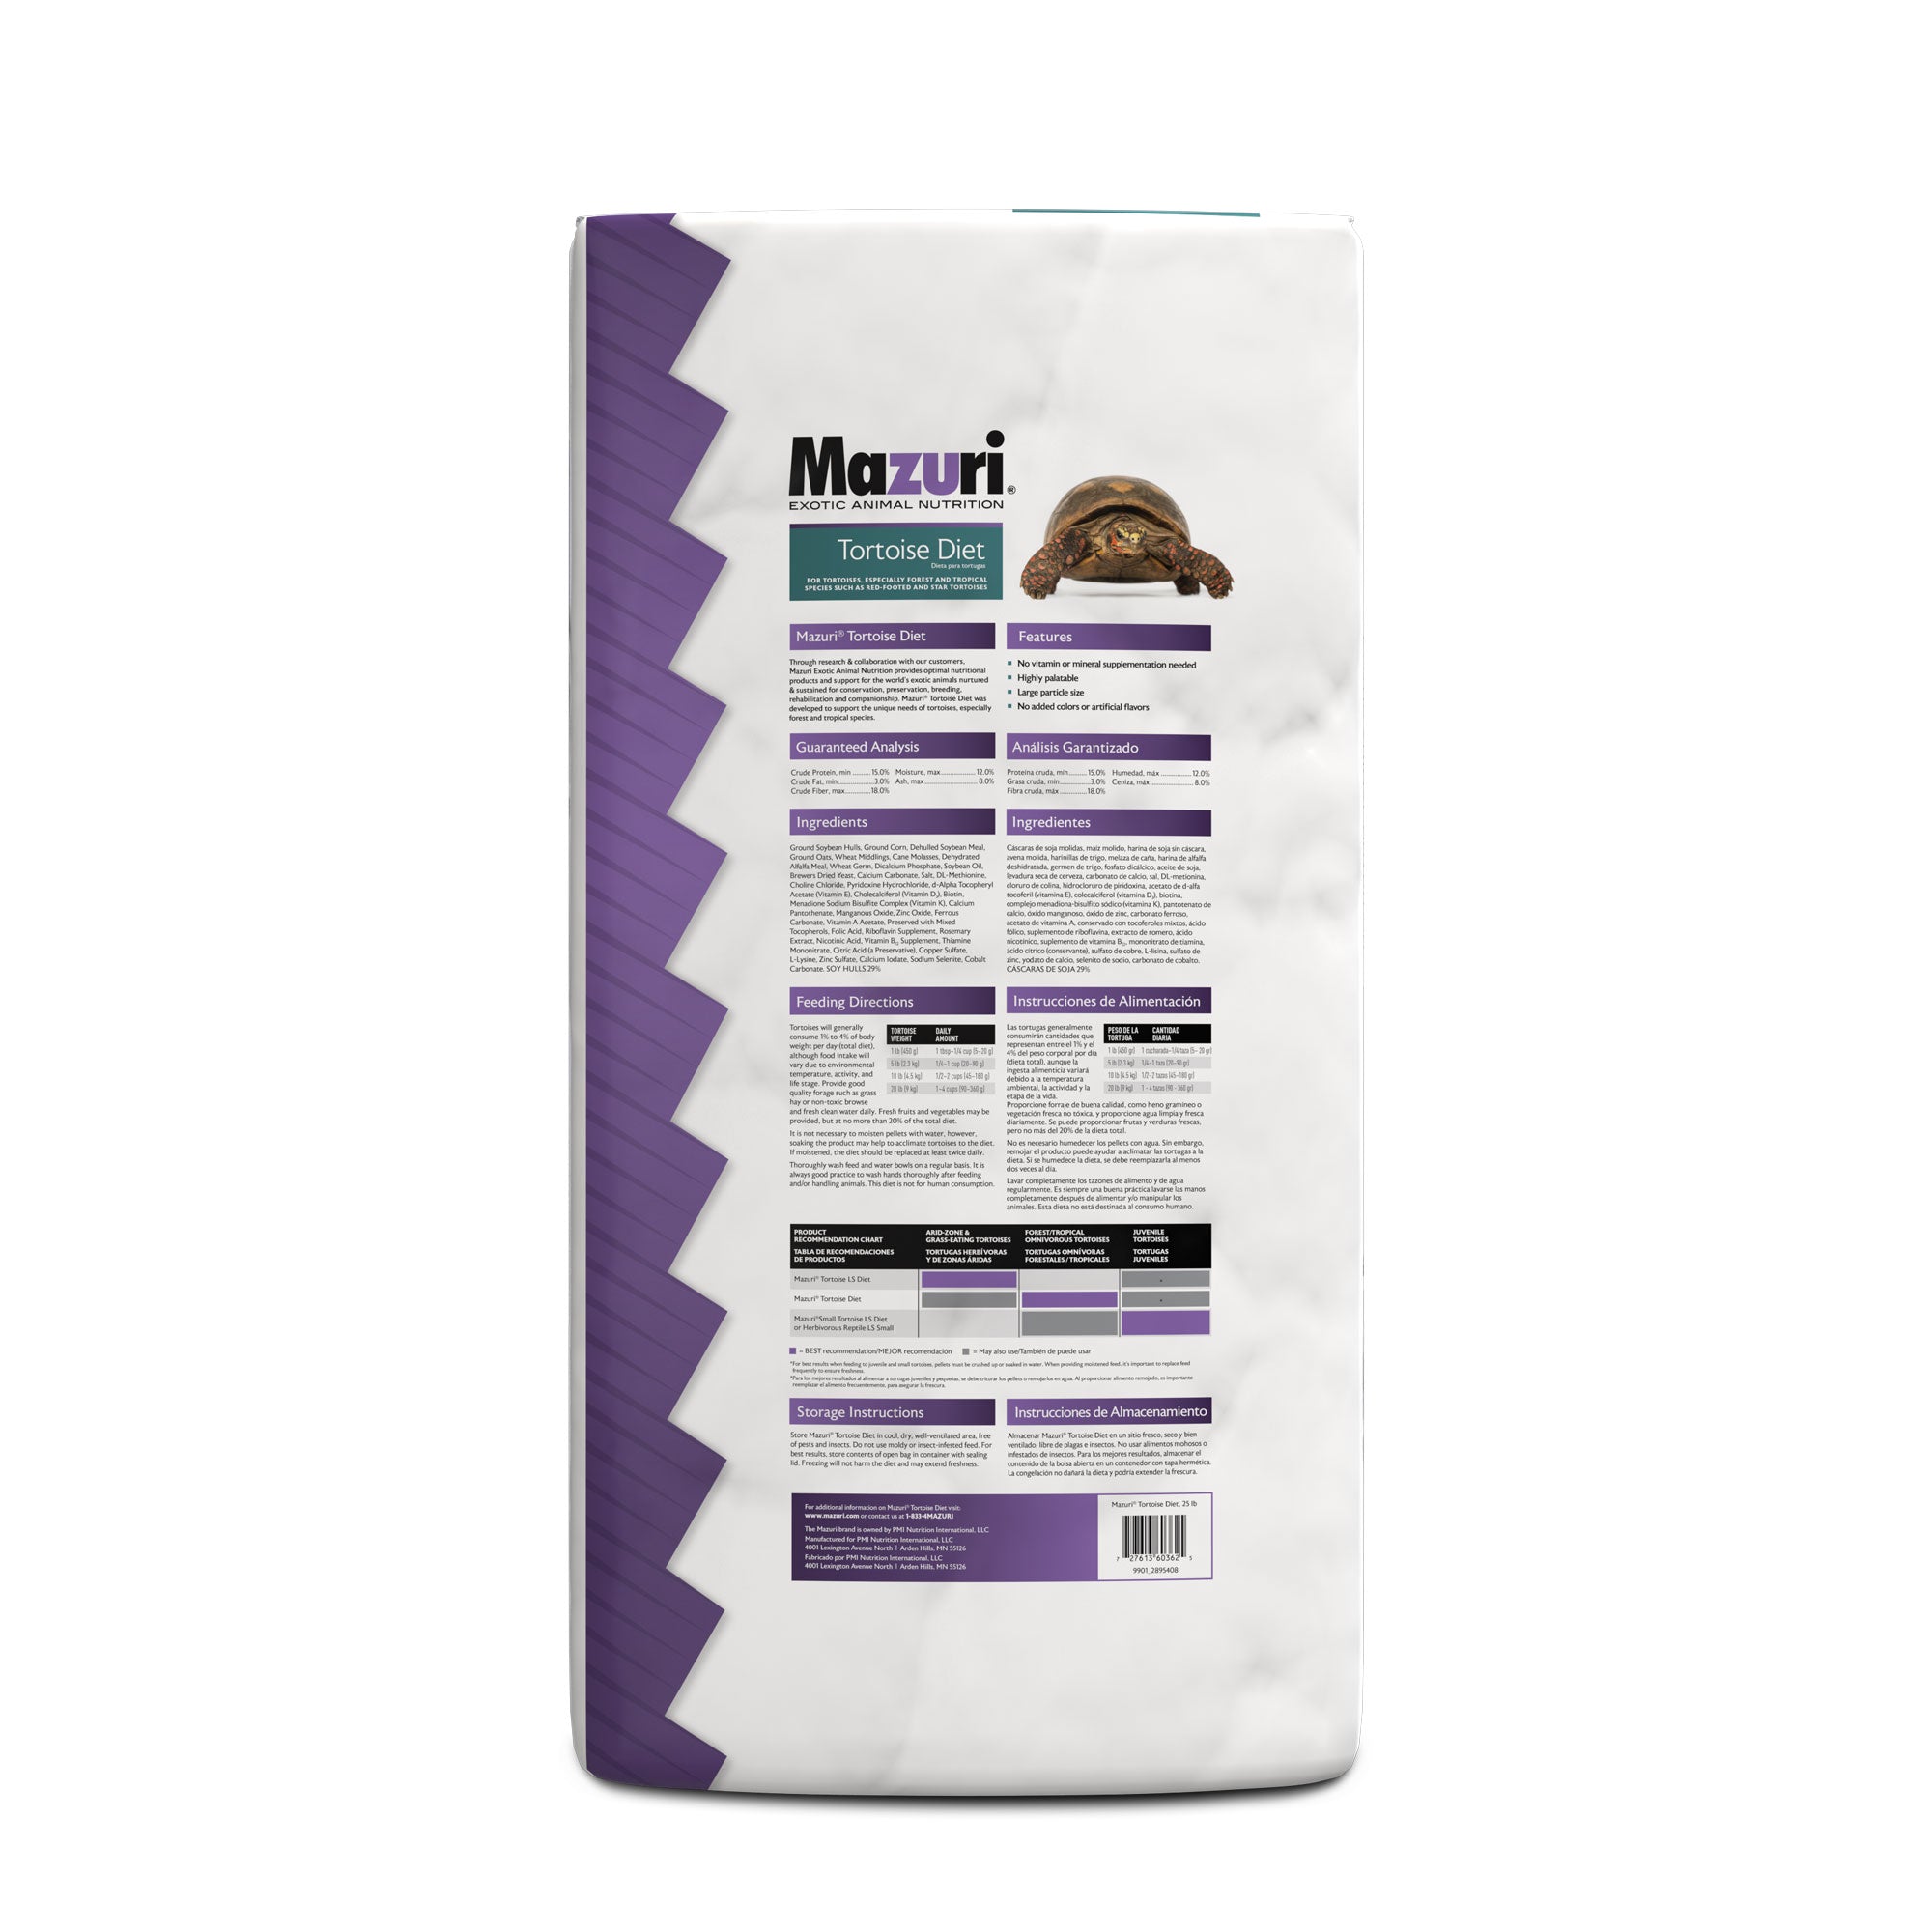 Mazuri Tortoise Diet large bag showing features, guarantees and feeding directions